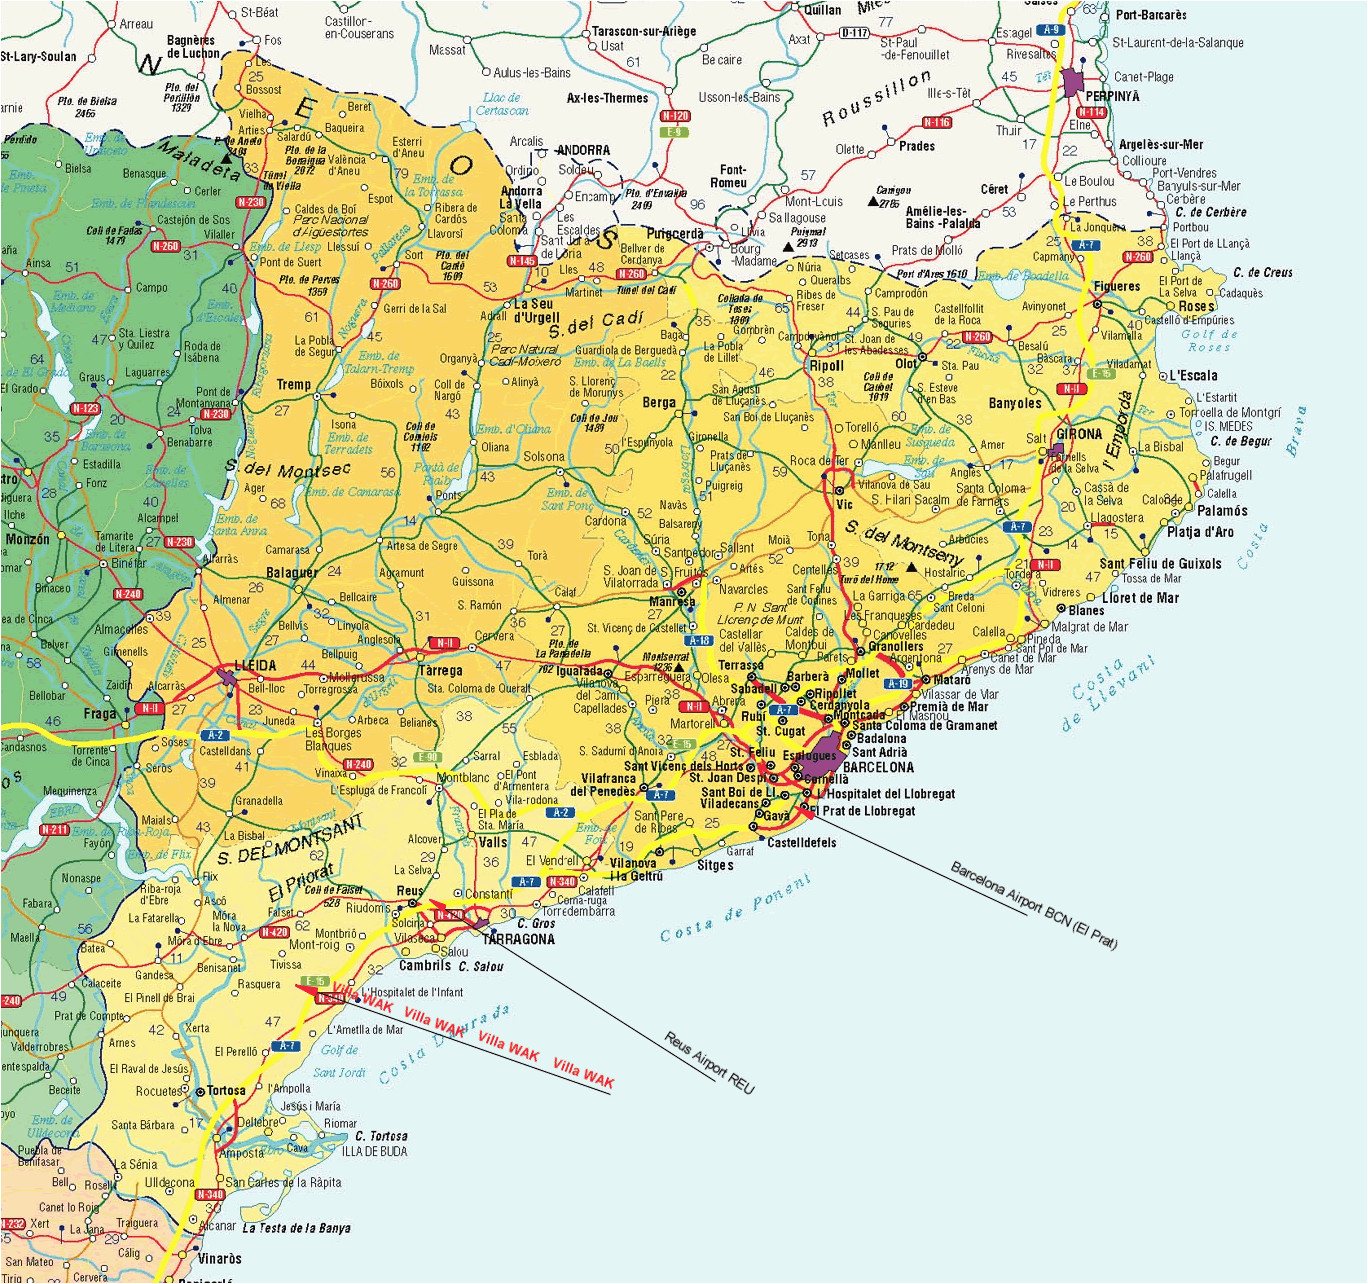 Spain tourist attractions Map Spain Map tourist attractions Travelsfinders Com A